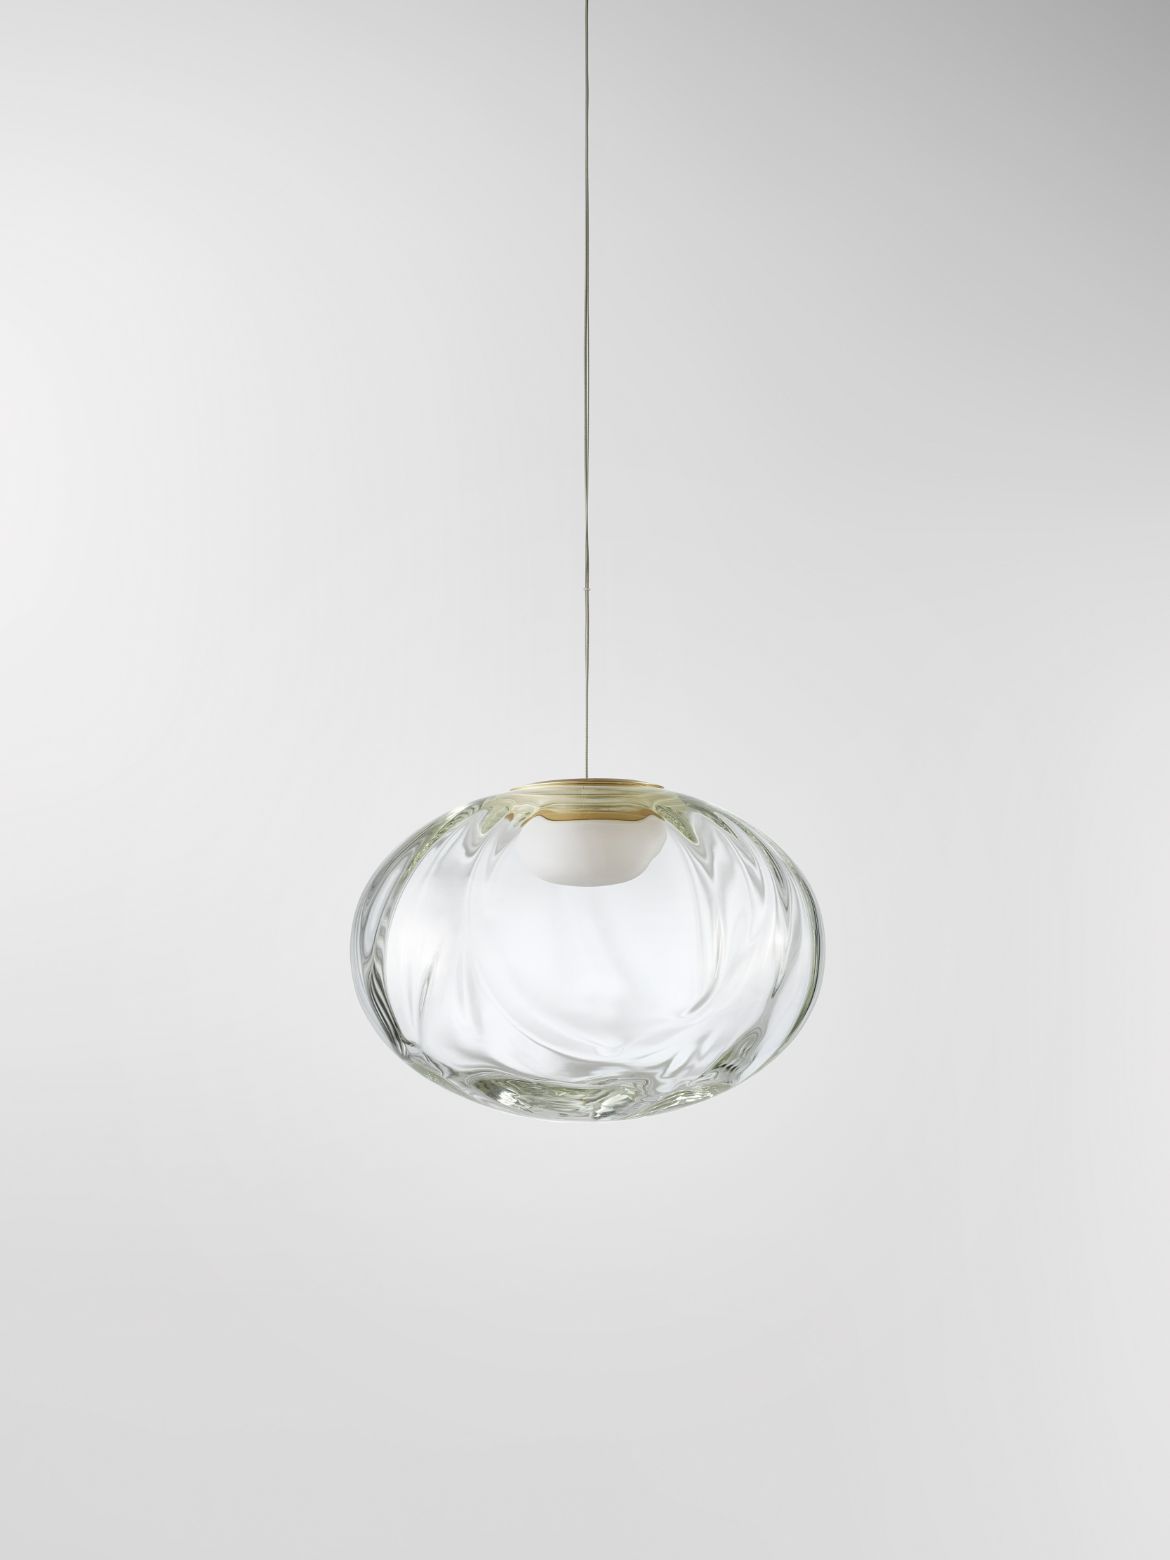 Ross Gardam’s Méne light named The Object of 2023 at INDEs